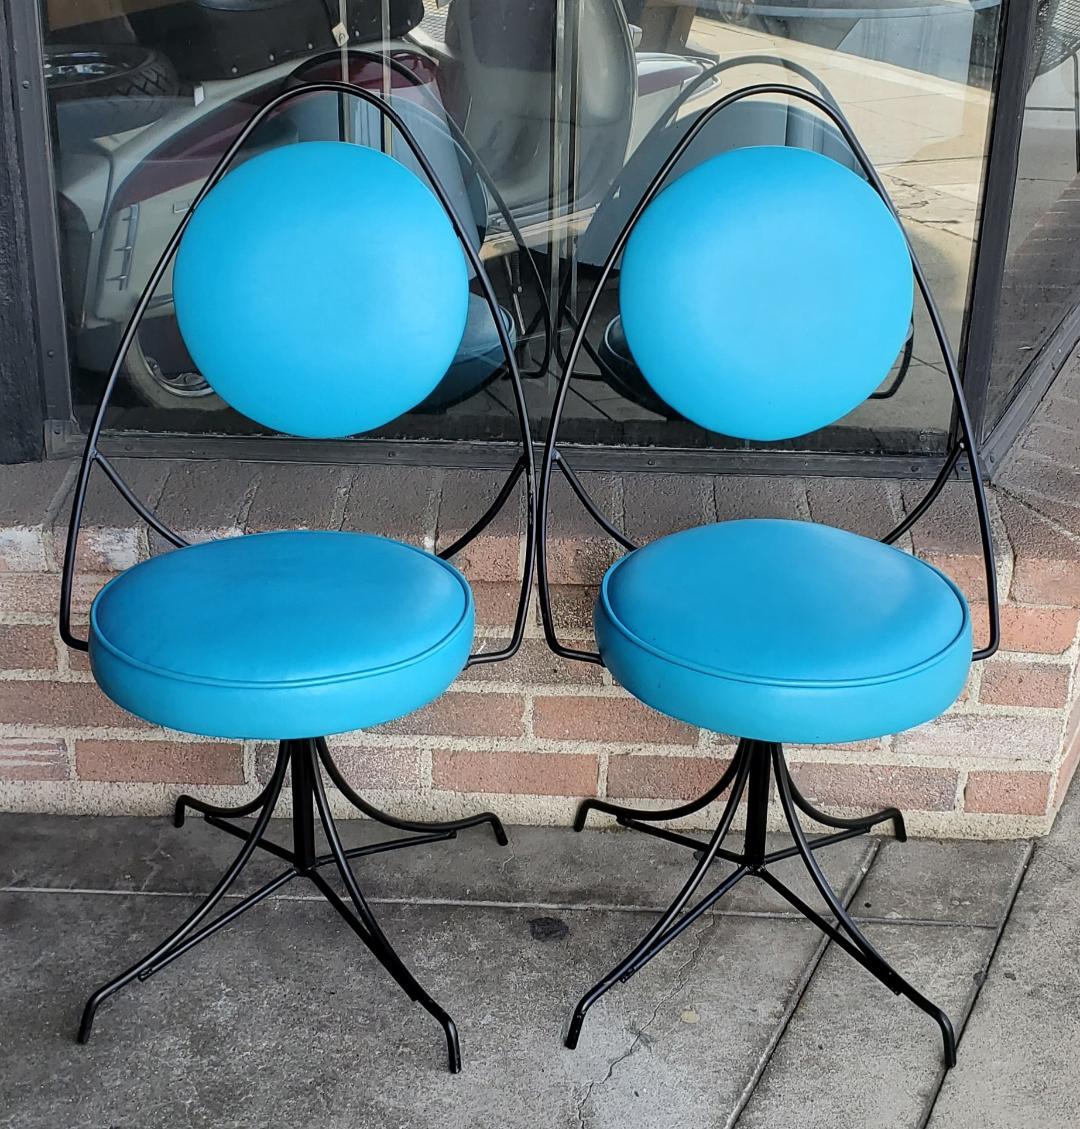 1950s Black and Blue Swivel Side Chairs Styled After John Risley - Set of 2 For Sale 8